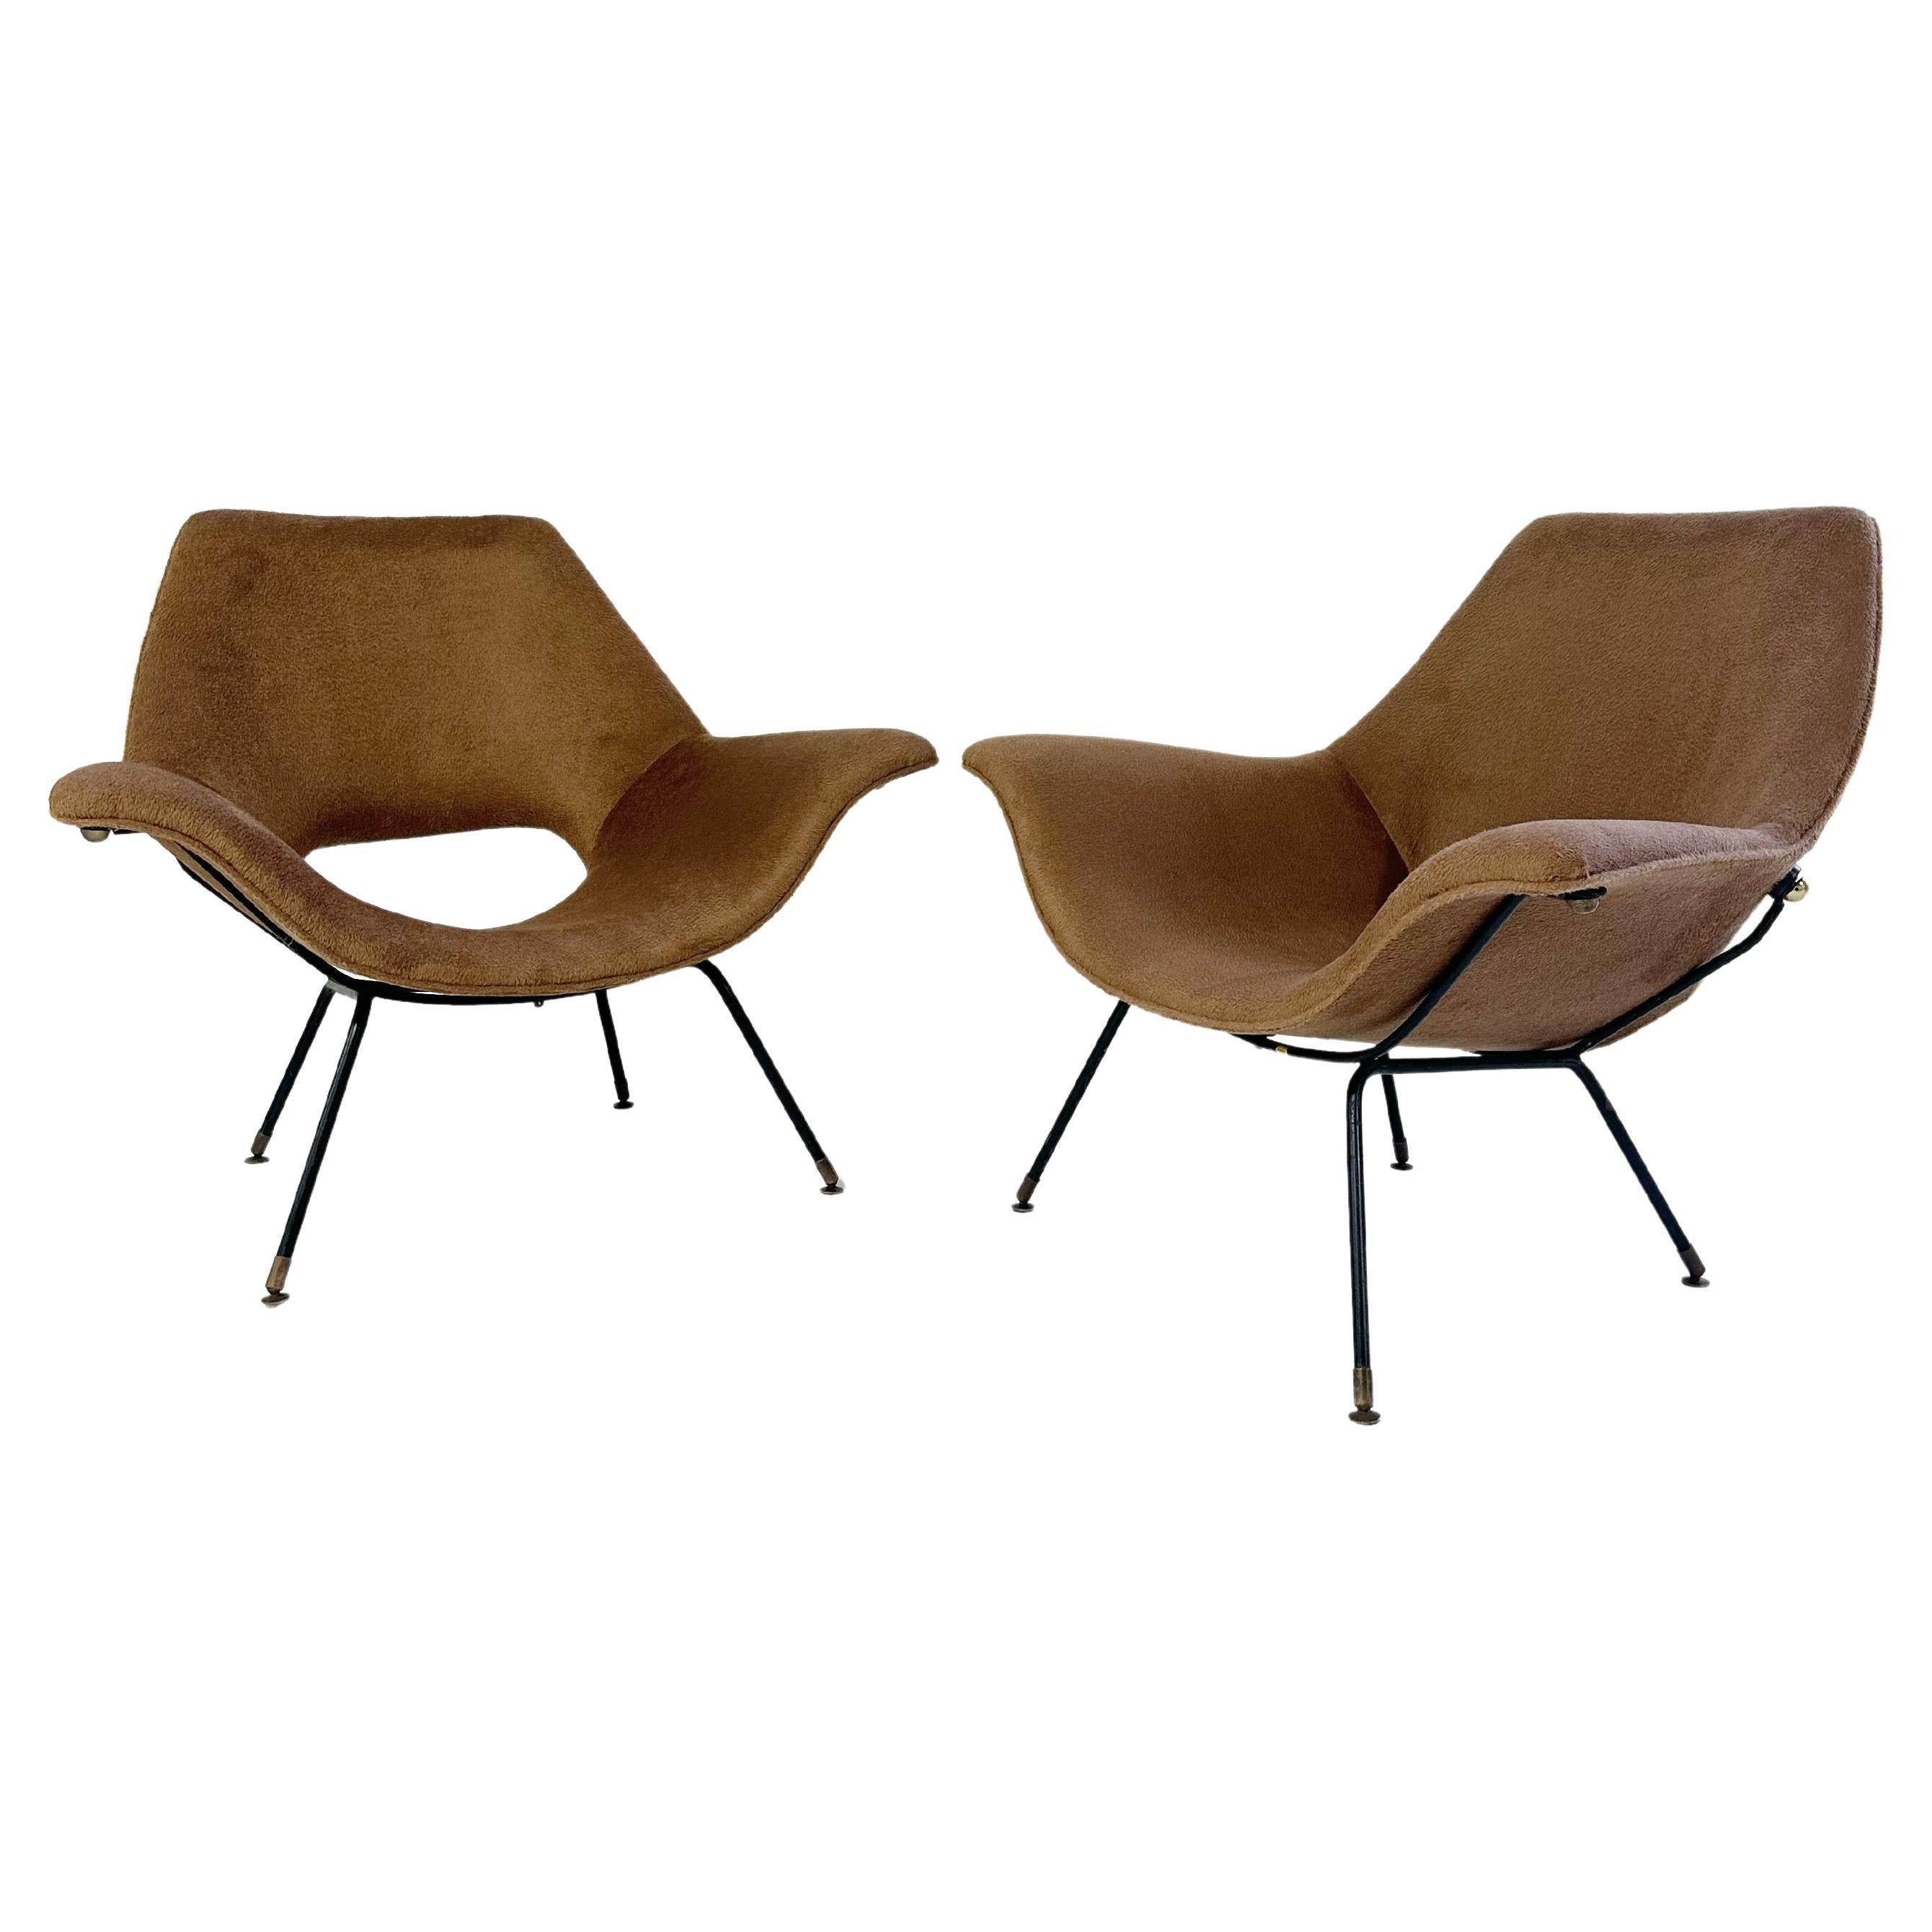 Augusto Bozzi Lounge Chairs in Inata Alpaca Fabric, pair For Sale